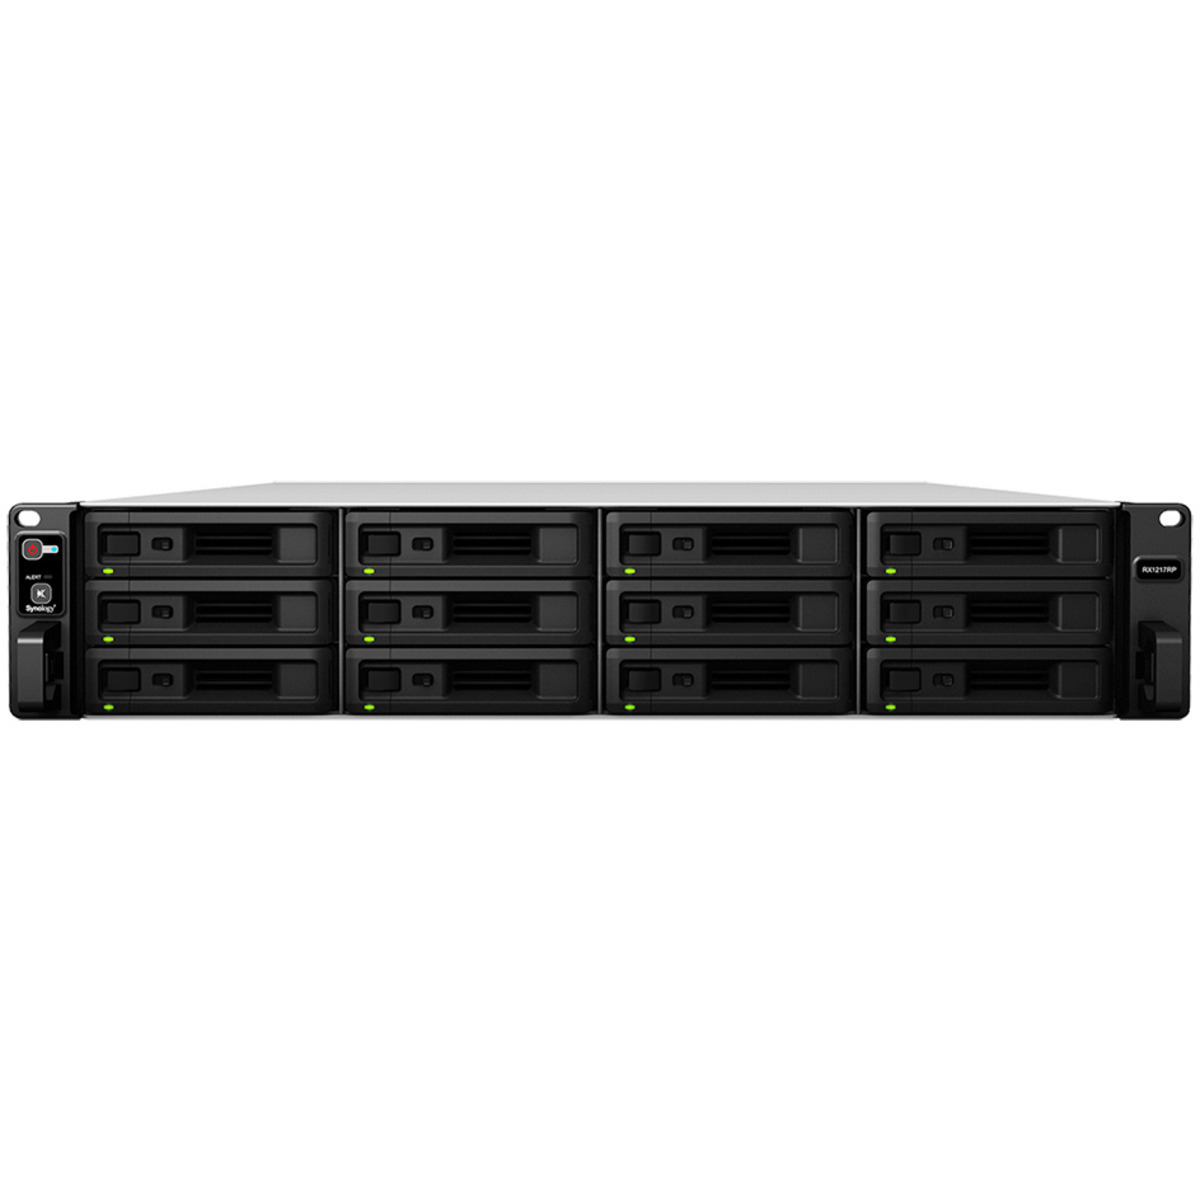 buy Synology RX1217 RackMount Expansion Enclosure Burn-In Tested Configurations - nas headquarters buy network attached storage server device das new raid-5 free shipping usa christmas new year holiday sale RX1217